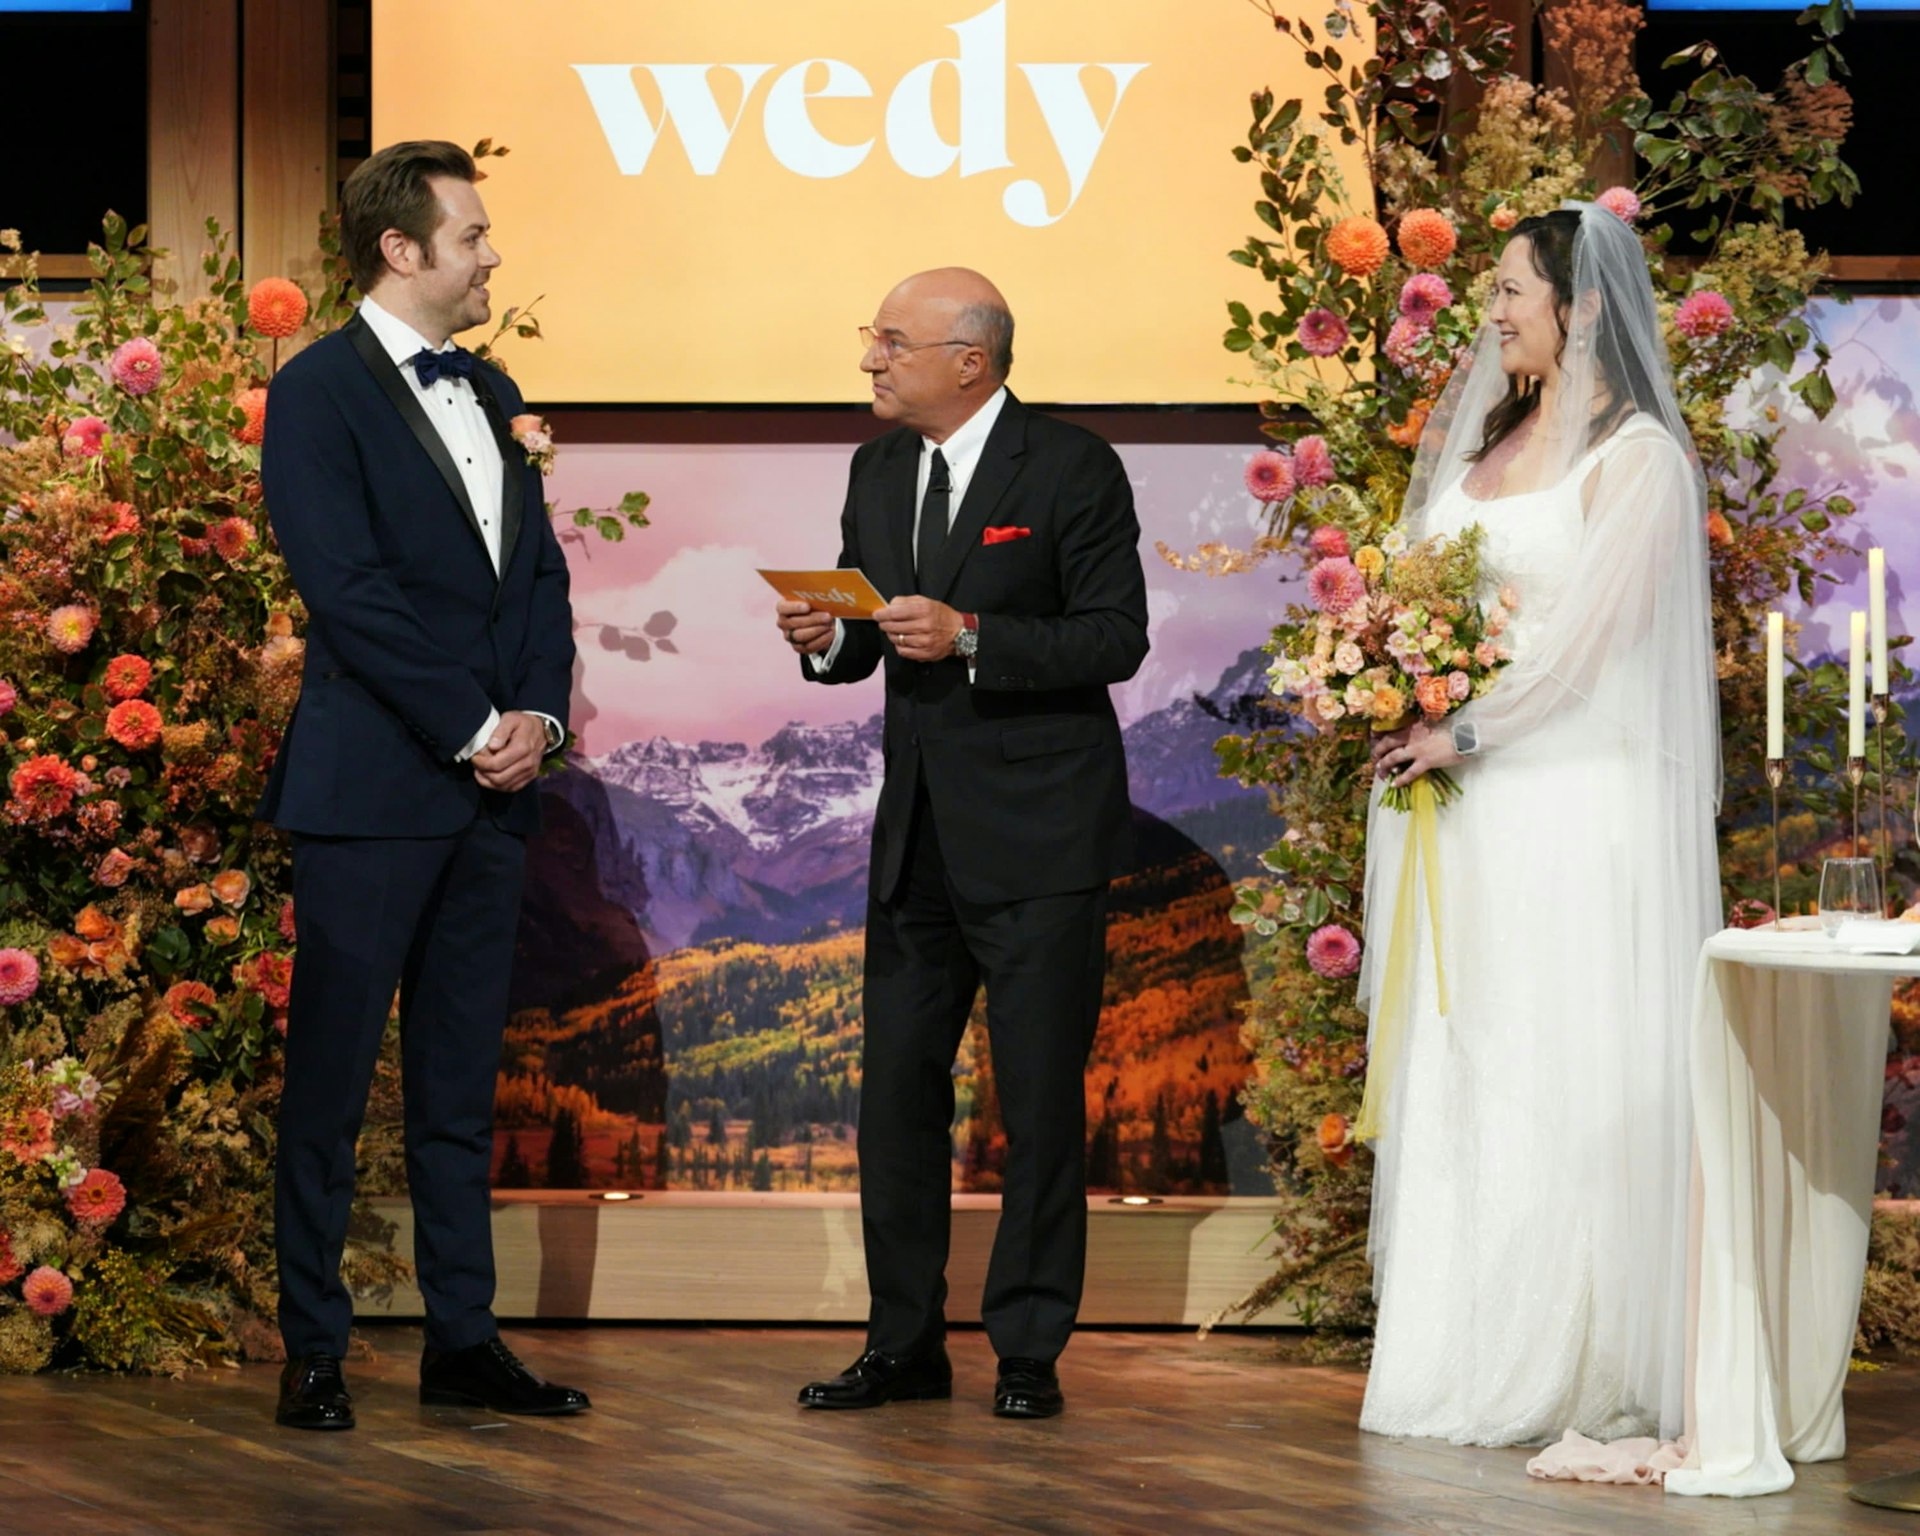 Kevin O’Leary as the Wedding Officiant. 